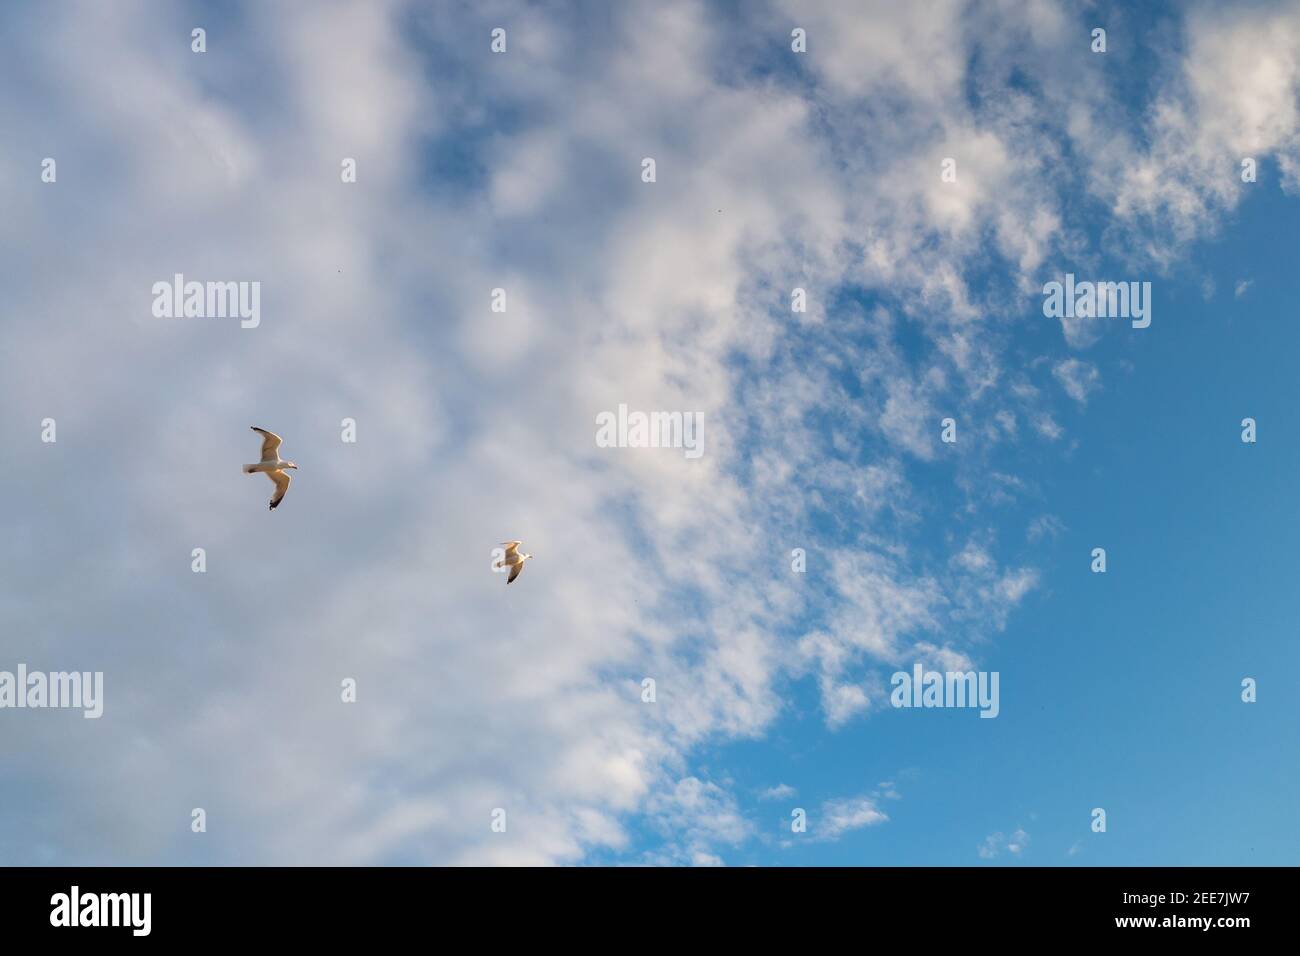 Two seagulls flying against the background of clouds towards the blue sky. Striving for a better life. A symbol of freedom and love. Copy space. Stock Photo